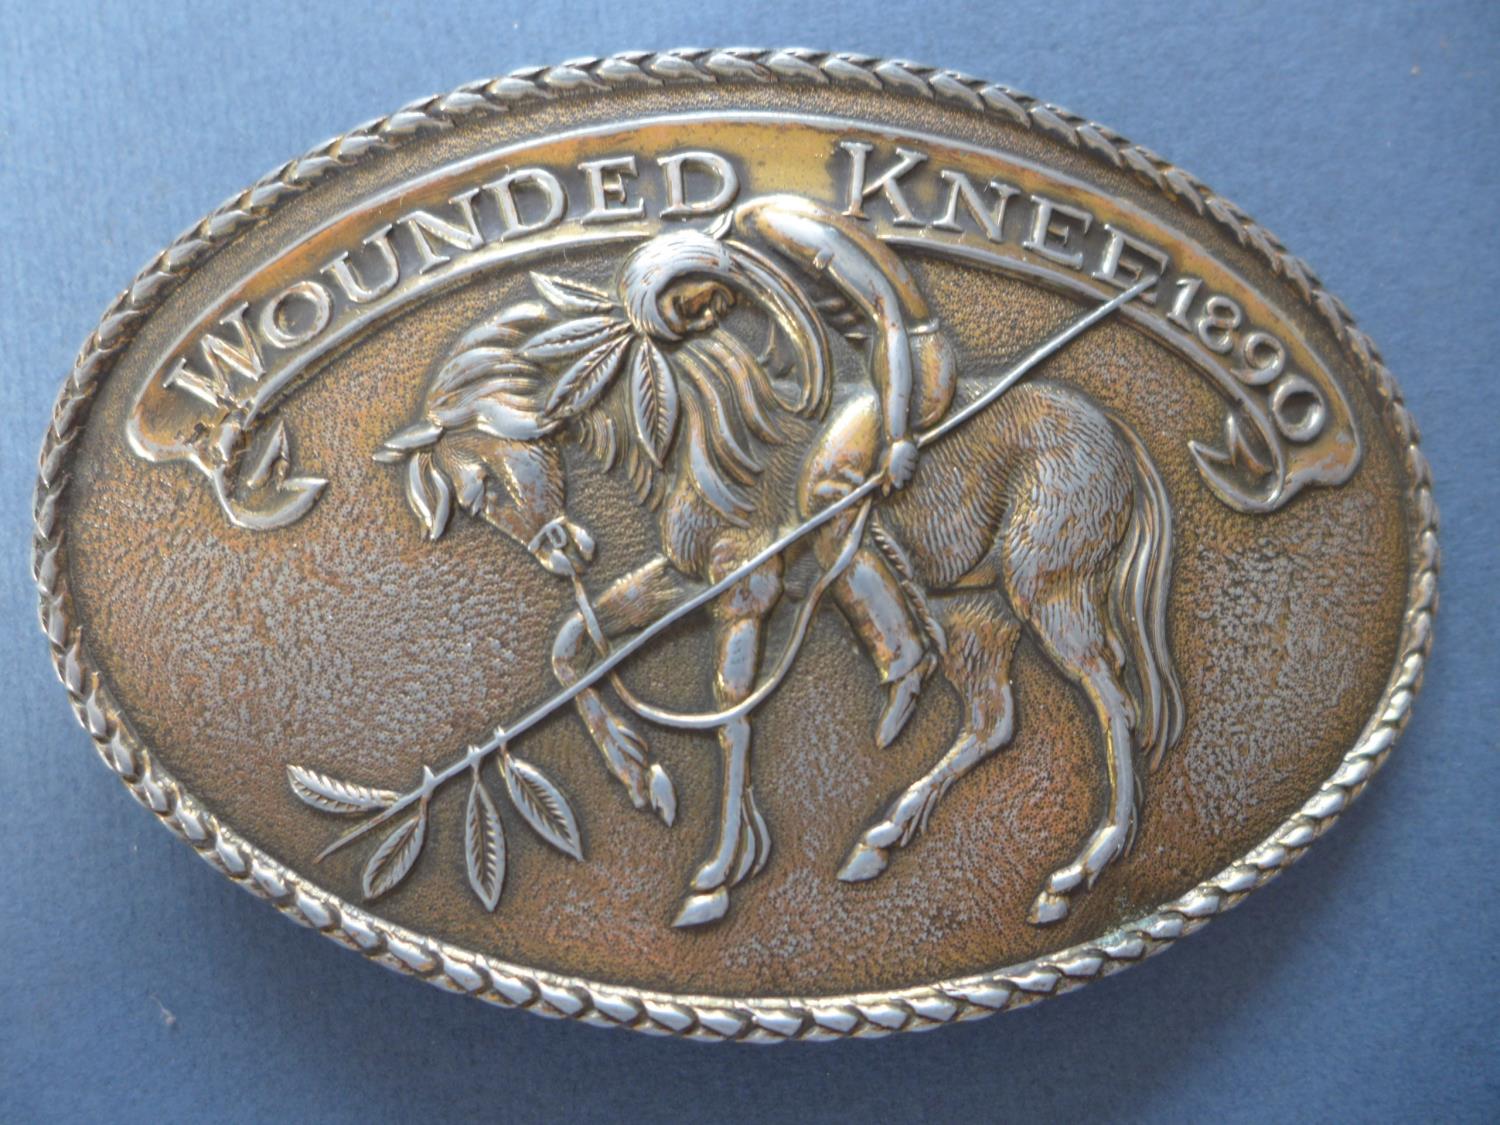 A WOUNDED KNEE BELT BUCKLE AND ONE OTHER - Image 2 of 5